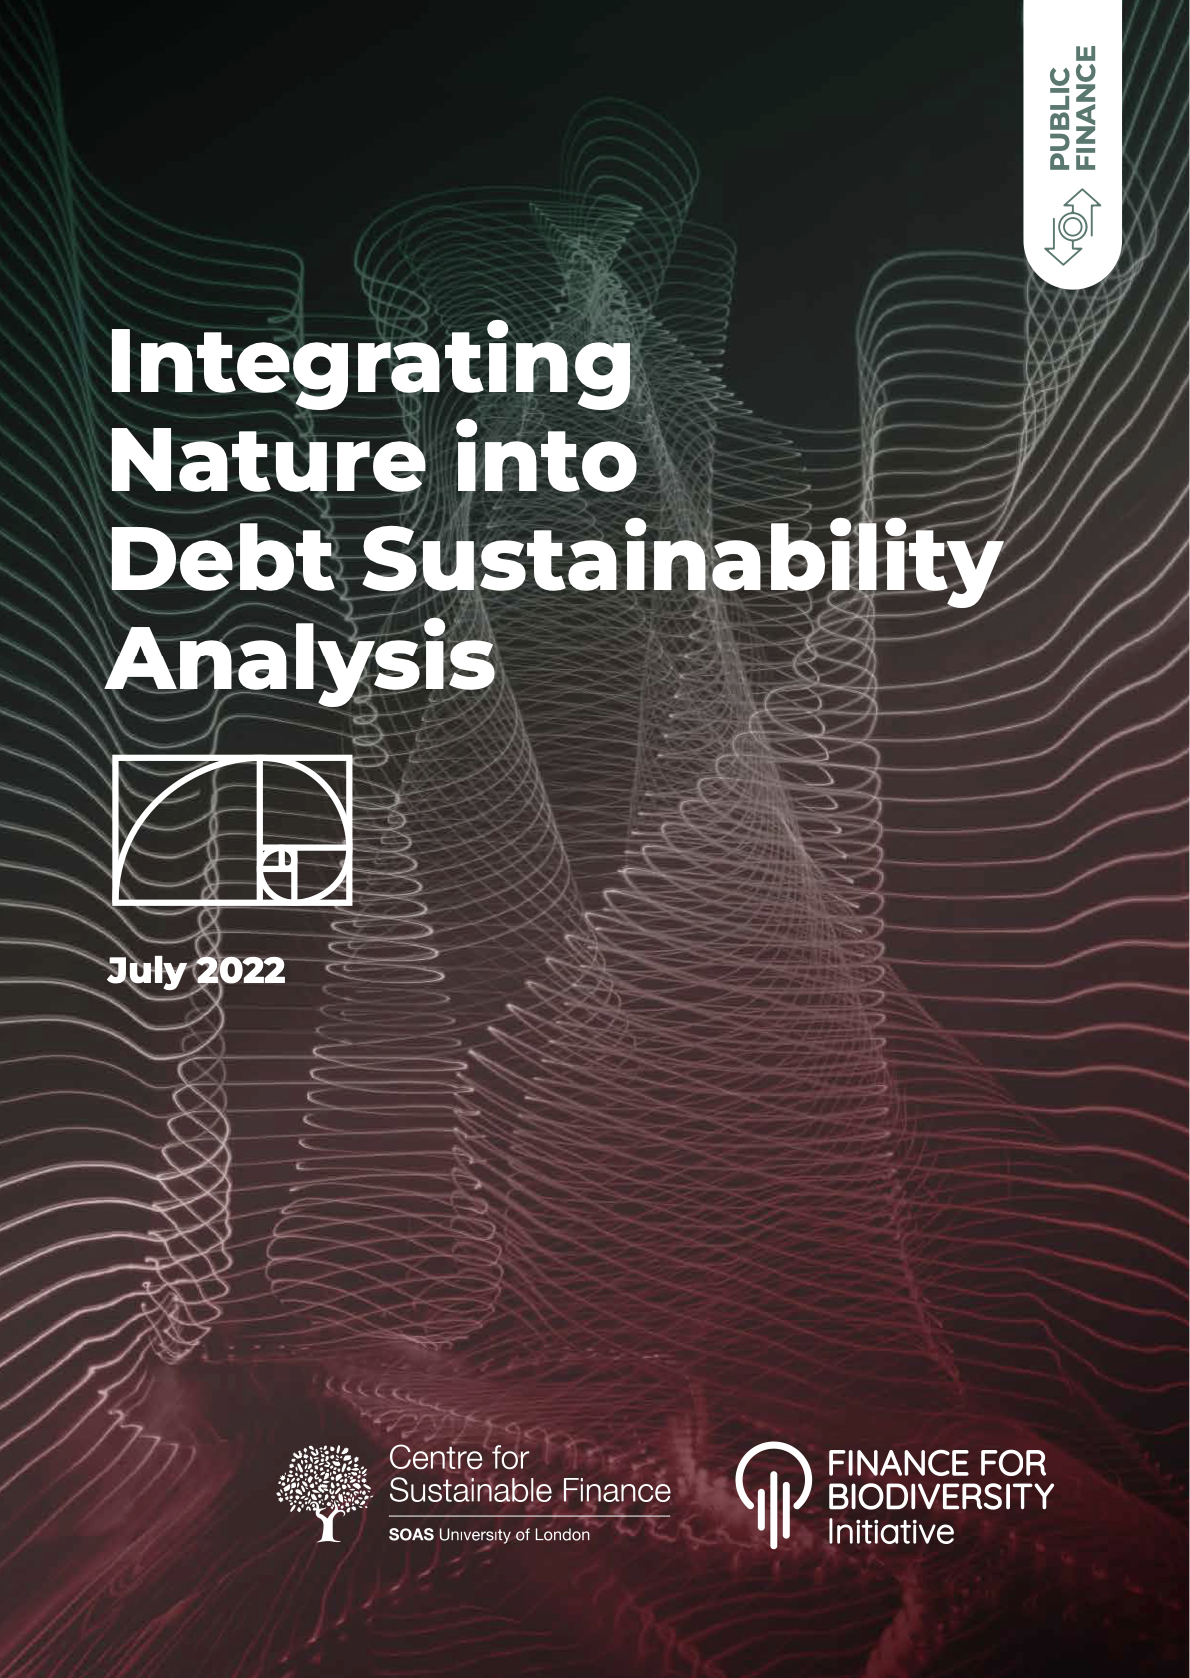 Integrating Nature into Debt Sustainability Analysis